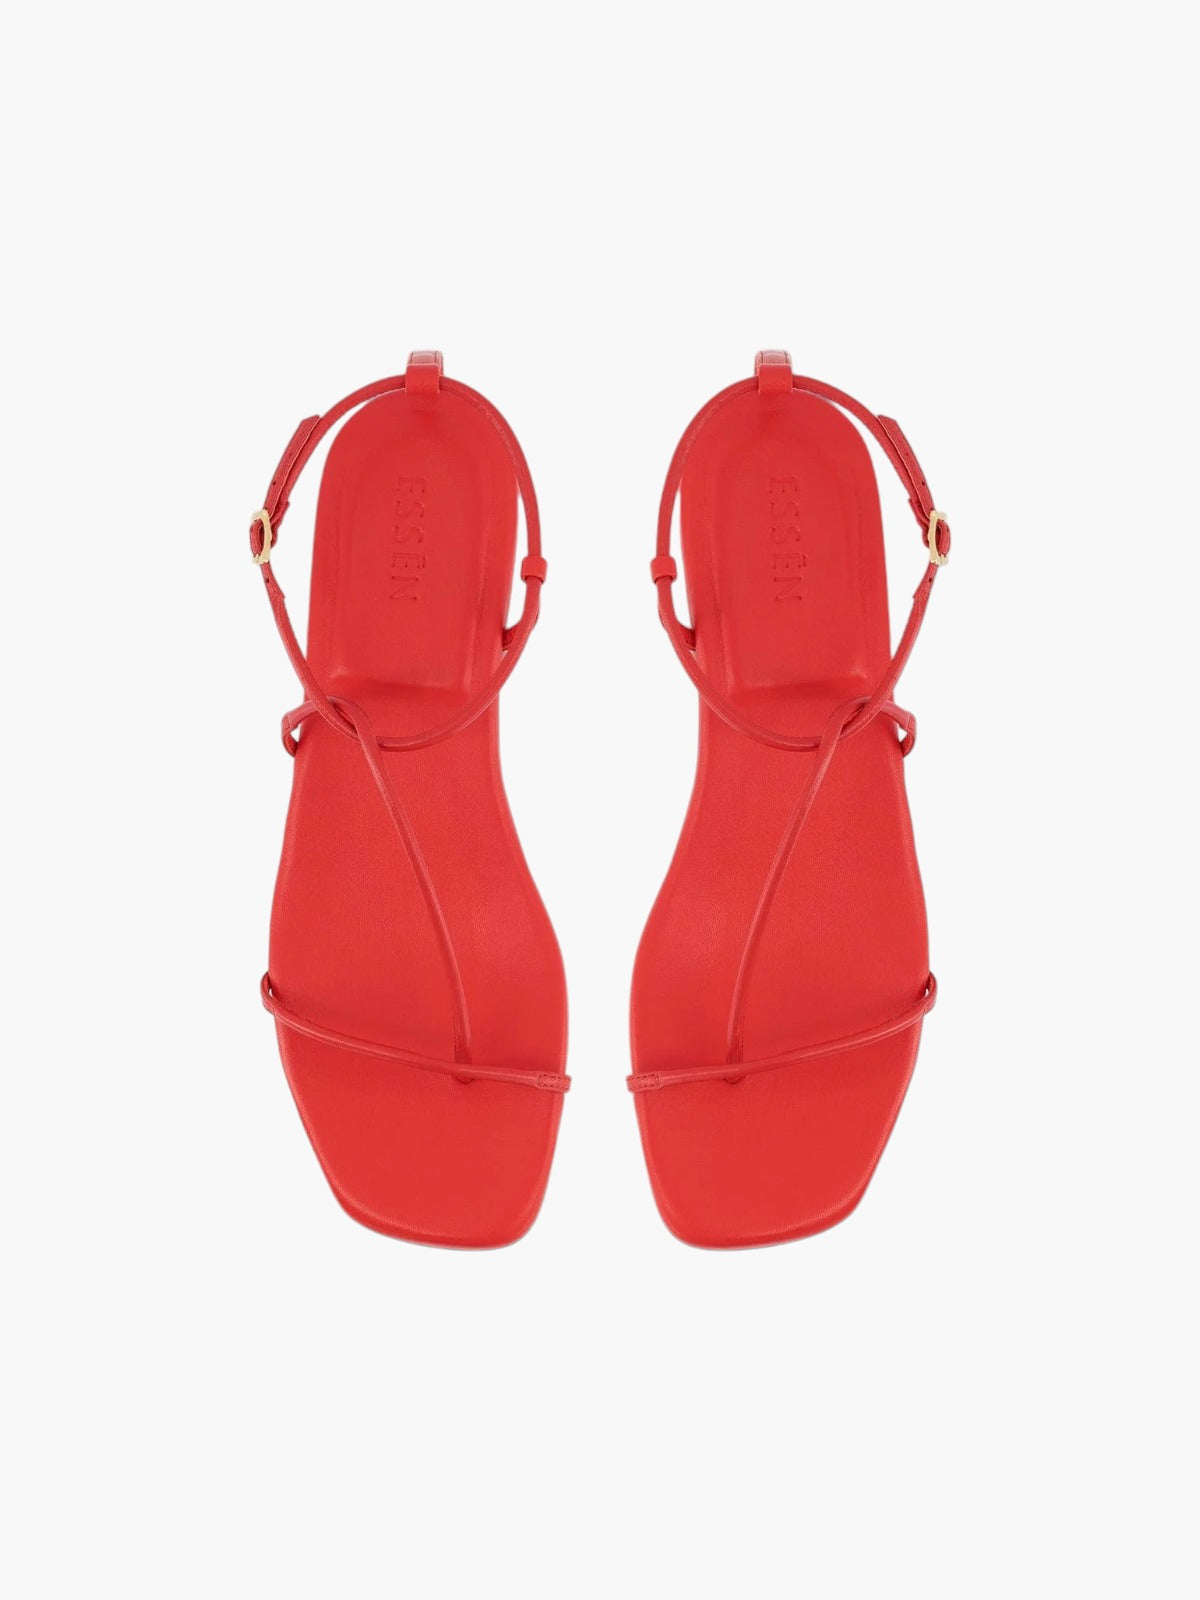 The Evening Sandal | Red